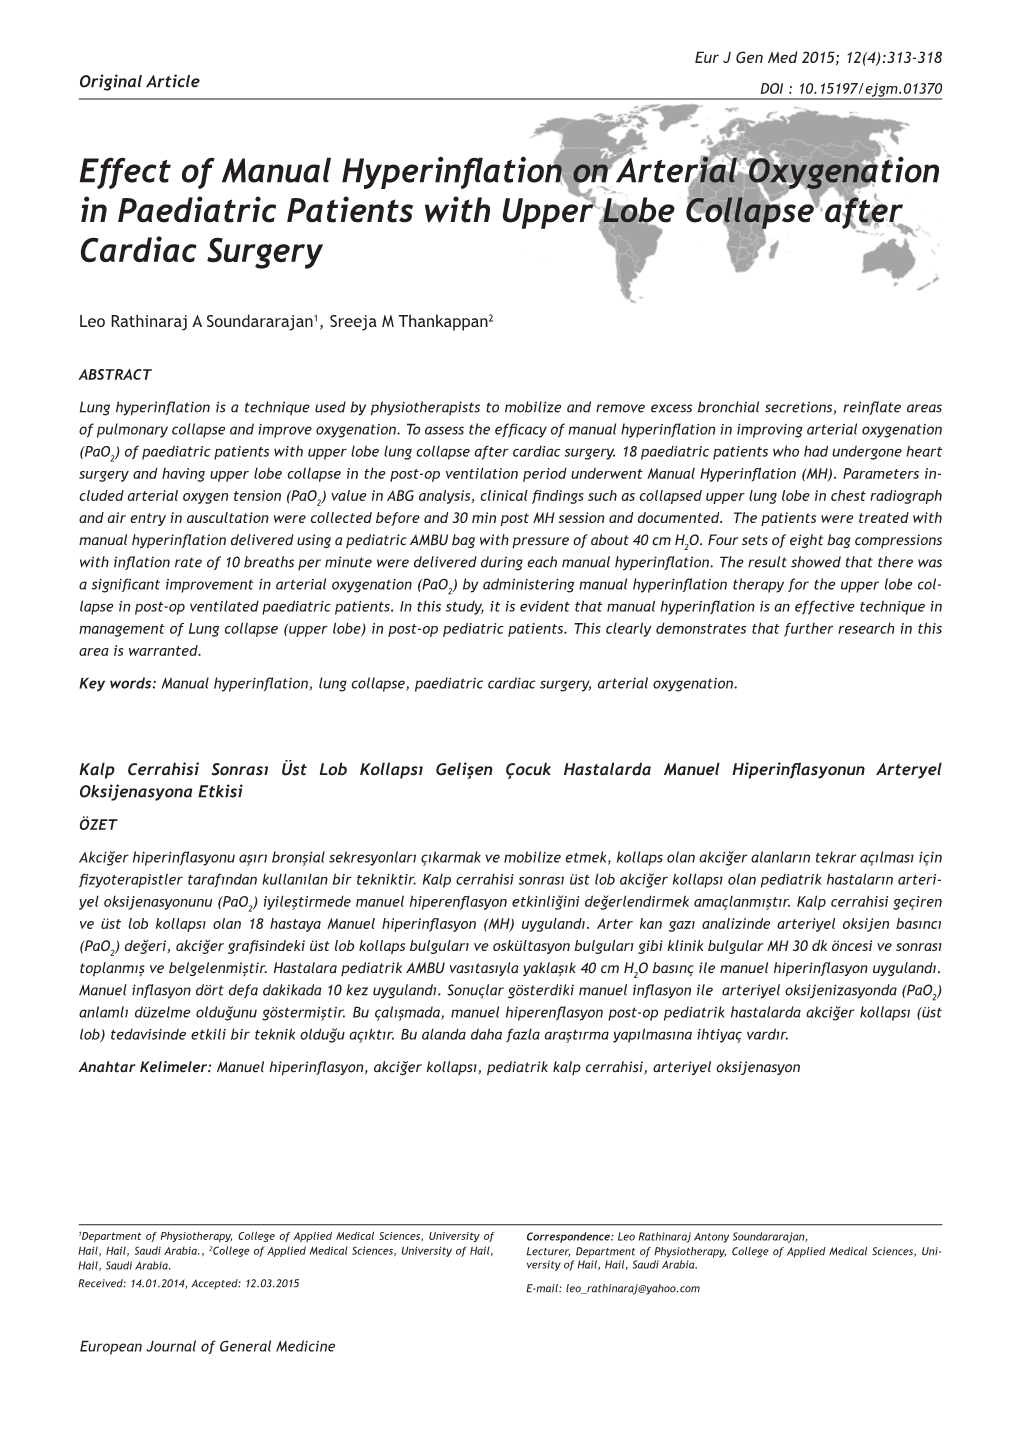 Effect of Manual Hyperinflation on Arterial Oxygenation in Paediatric Patients with Upper Lobe Collapse After Cardiac Surgery